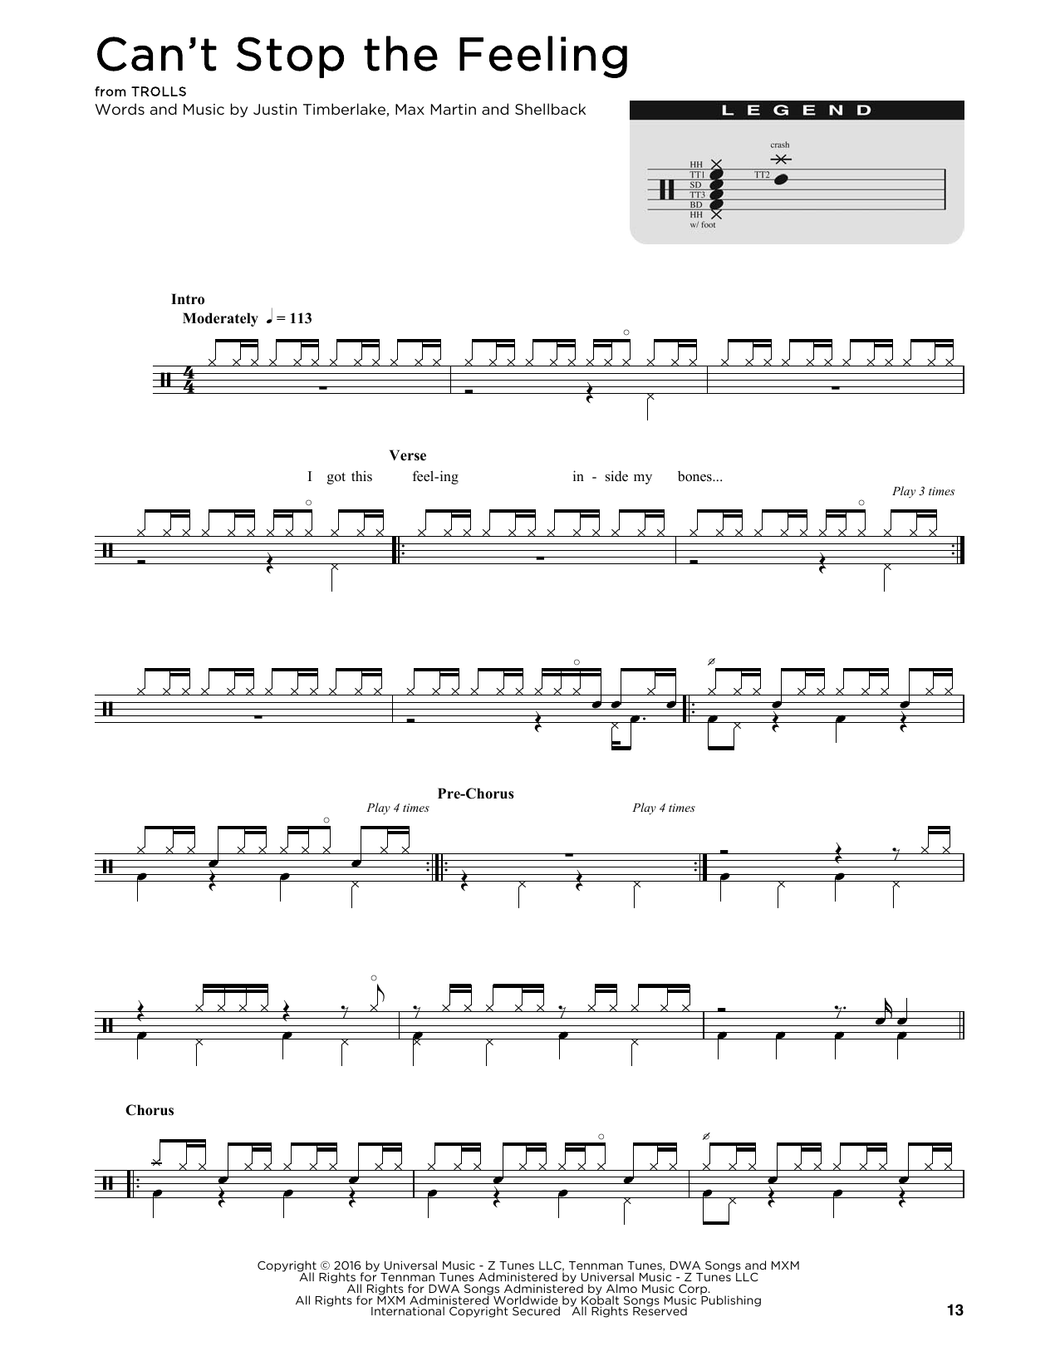 Can't Stop the Feeling! - Justin Timberlake - Full Drum Transcription / Drum Sheet Music - SheetMusicDirect DT185660